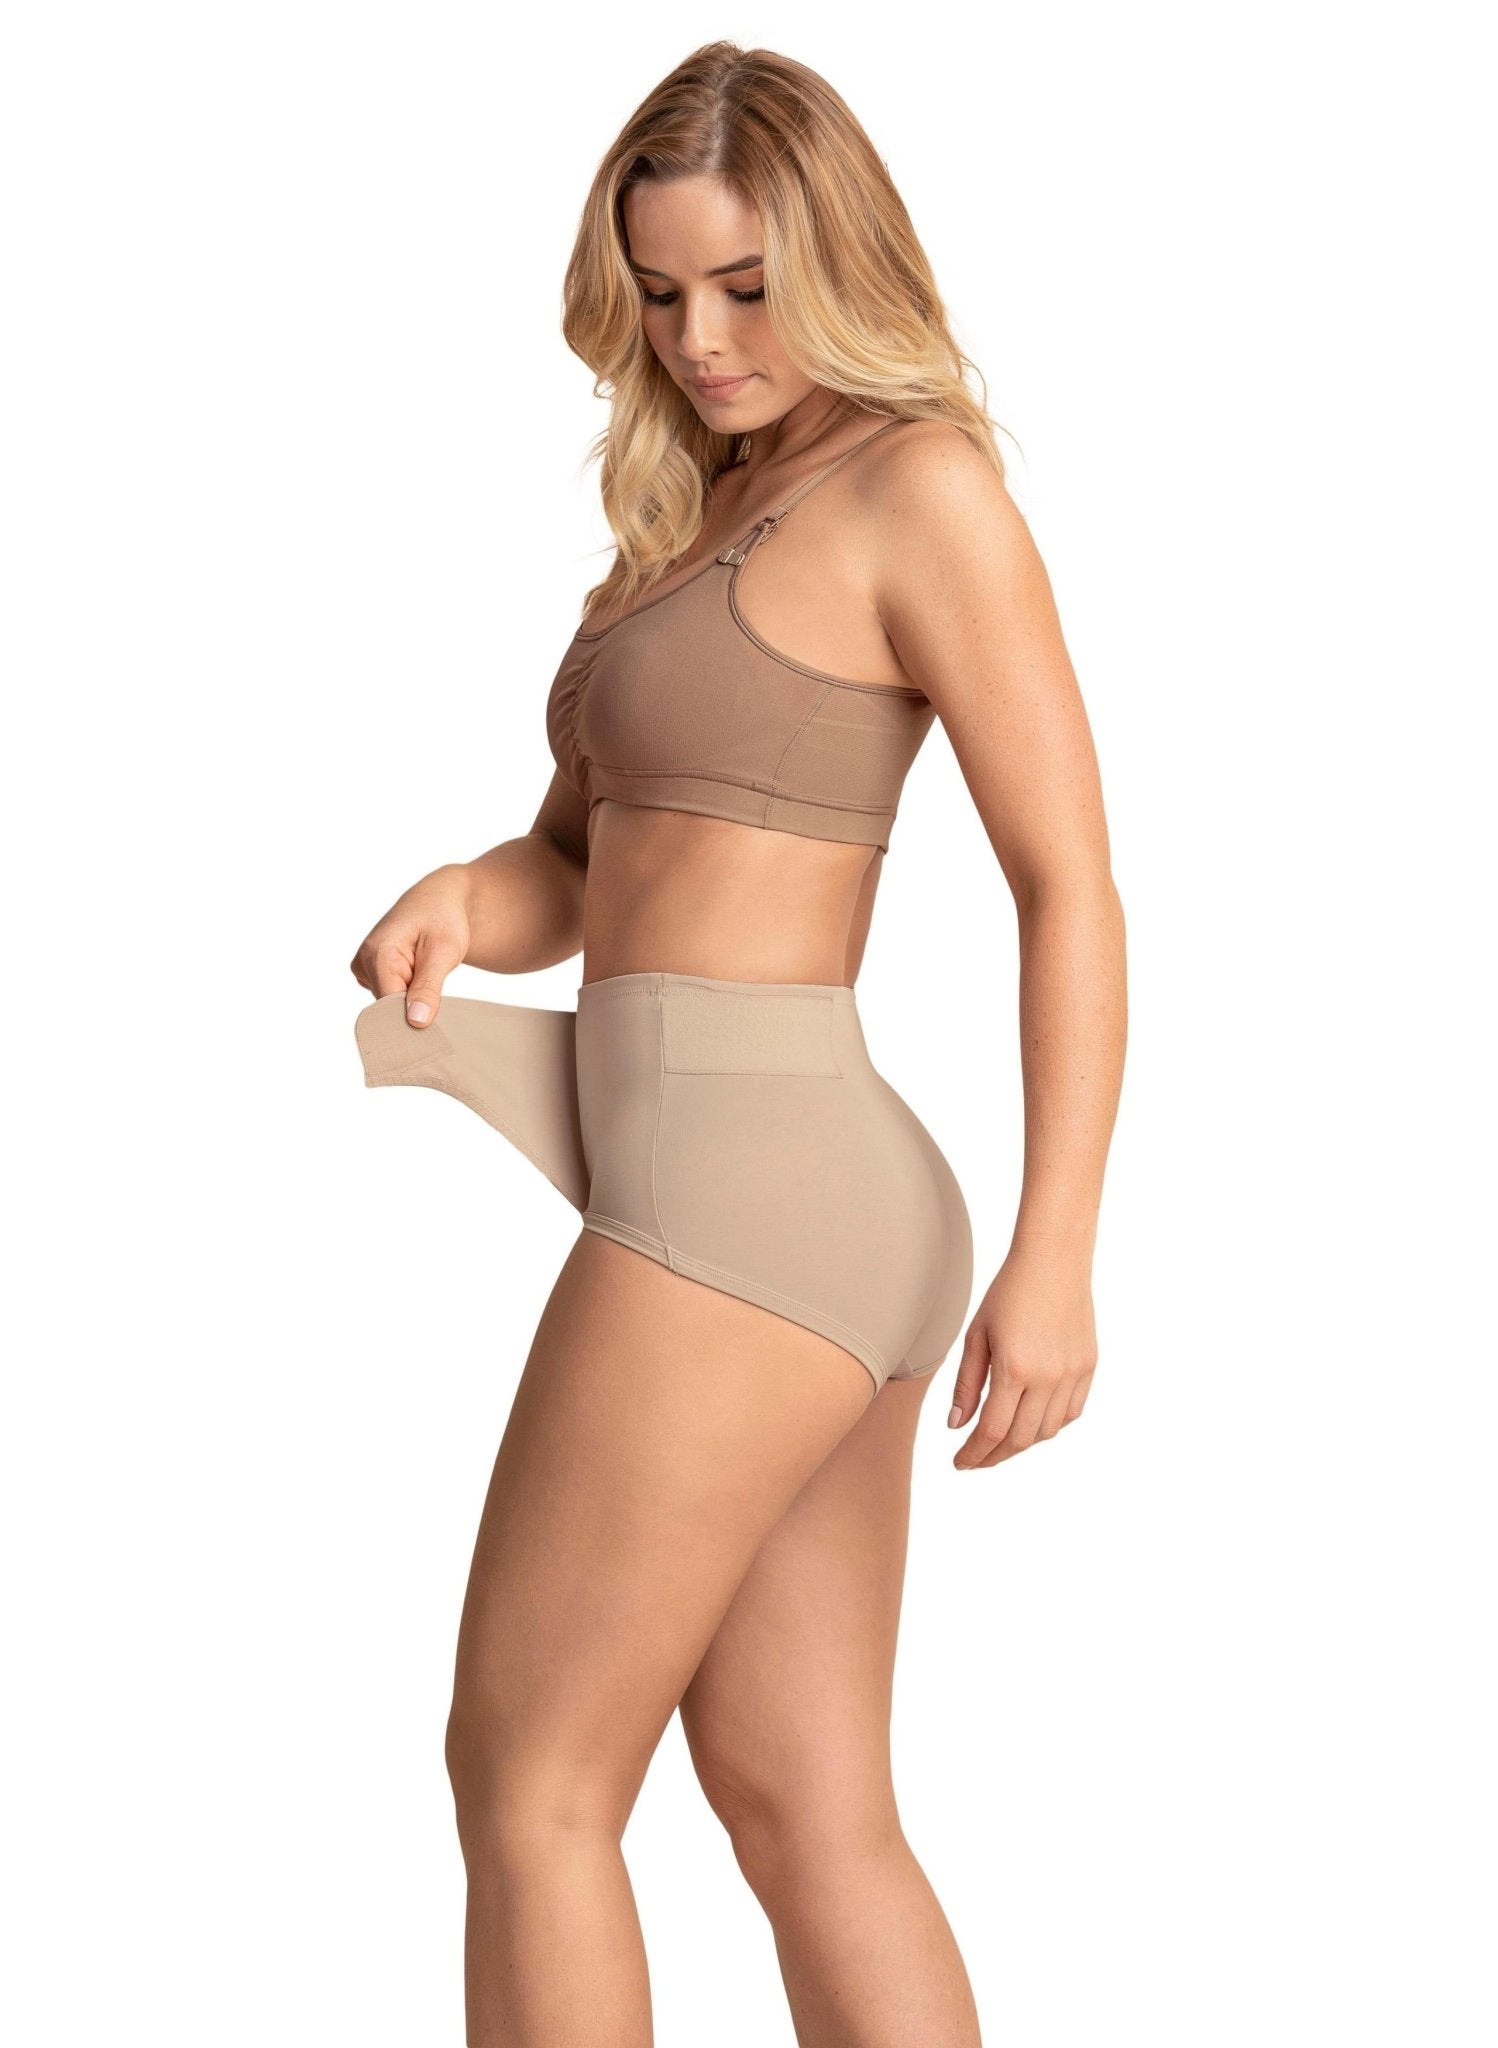 Firm Compression Postpartum Panty with Adjustable Belly Wrap